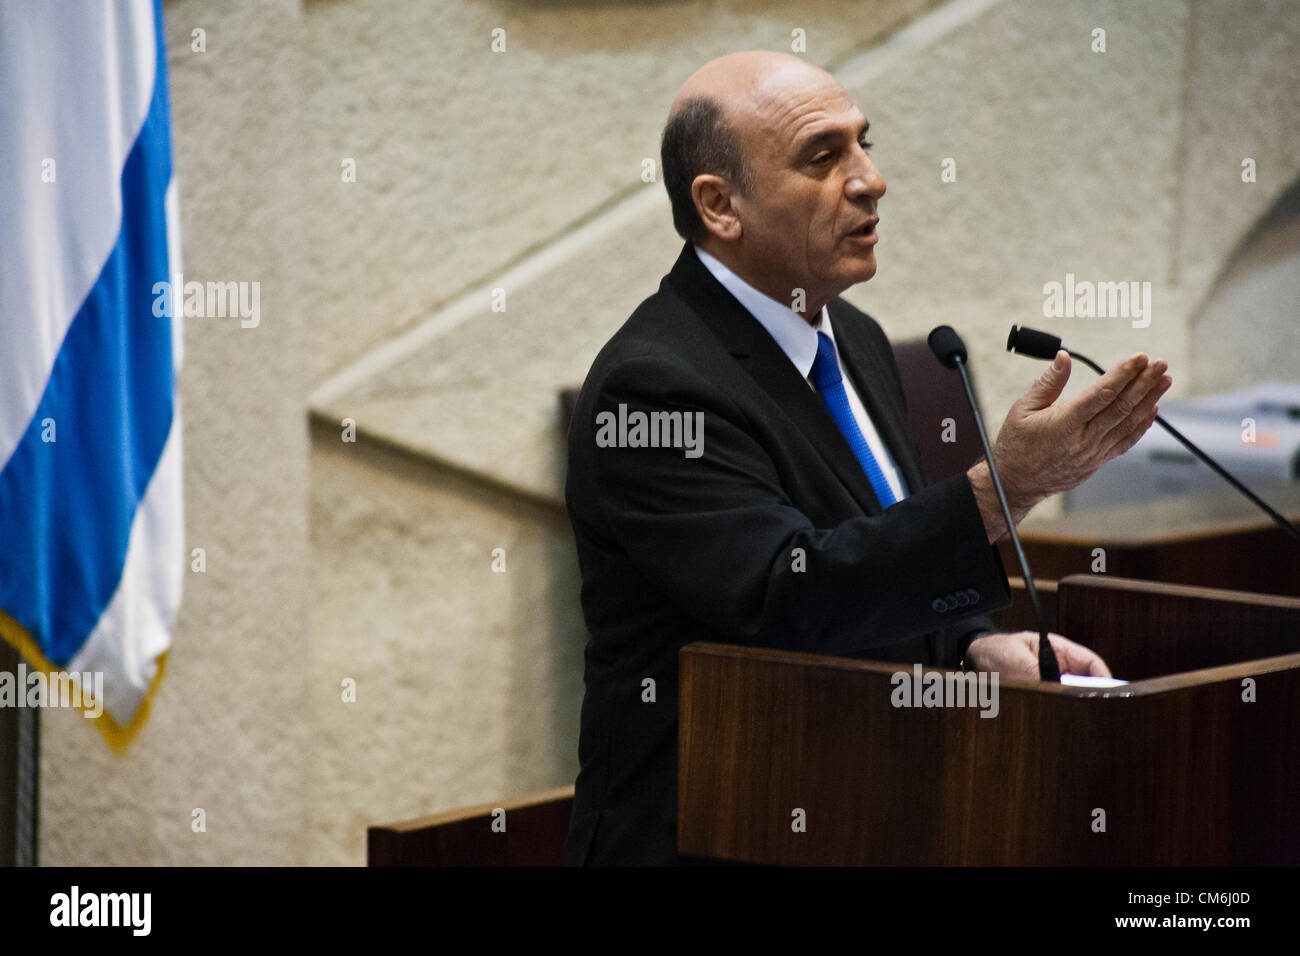 Leader of Opposition, MK Shaul Mofaz, addresses the Knesset and family and friends of late Rehavam ‘Gandhi’ Ze'evi, assassinated 11 years ago when shot in the head at the Jerusalem Hyatt Hotel. Jerusalem, Israel. 16-October-2012.  Knesset Plenum holds special session honoring the memory of Rehavam ‘Gandhi’ Ze'evi, former military general and MK, assassinated 17 October 2001 by Hamdi Quran of the Popular Front for the Liberation of Palestine. Stock Photo